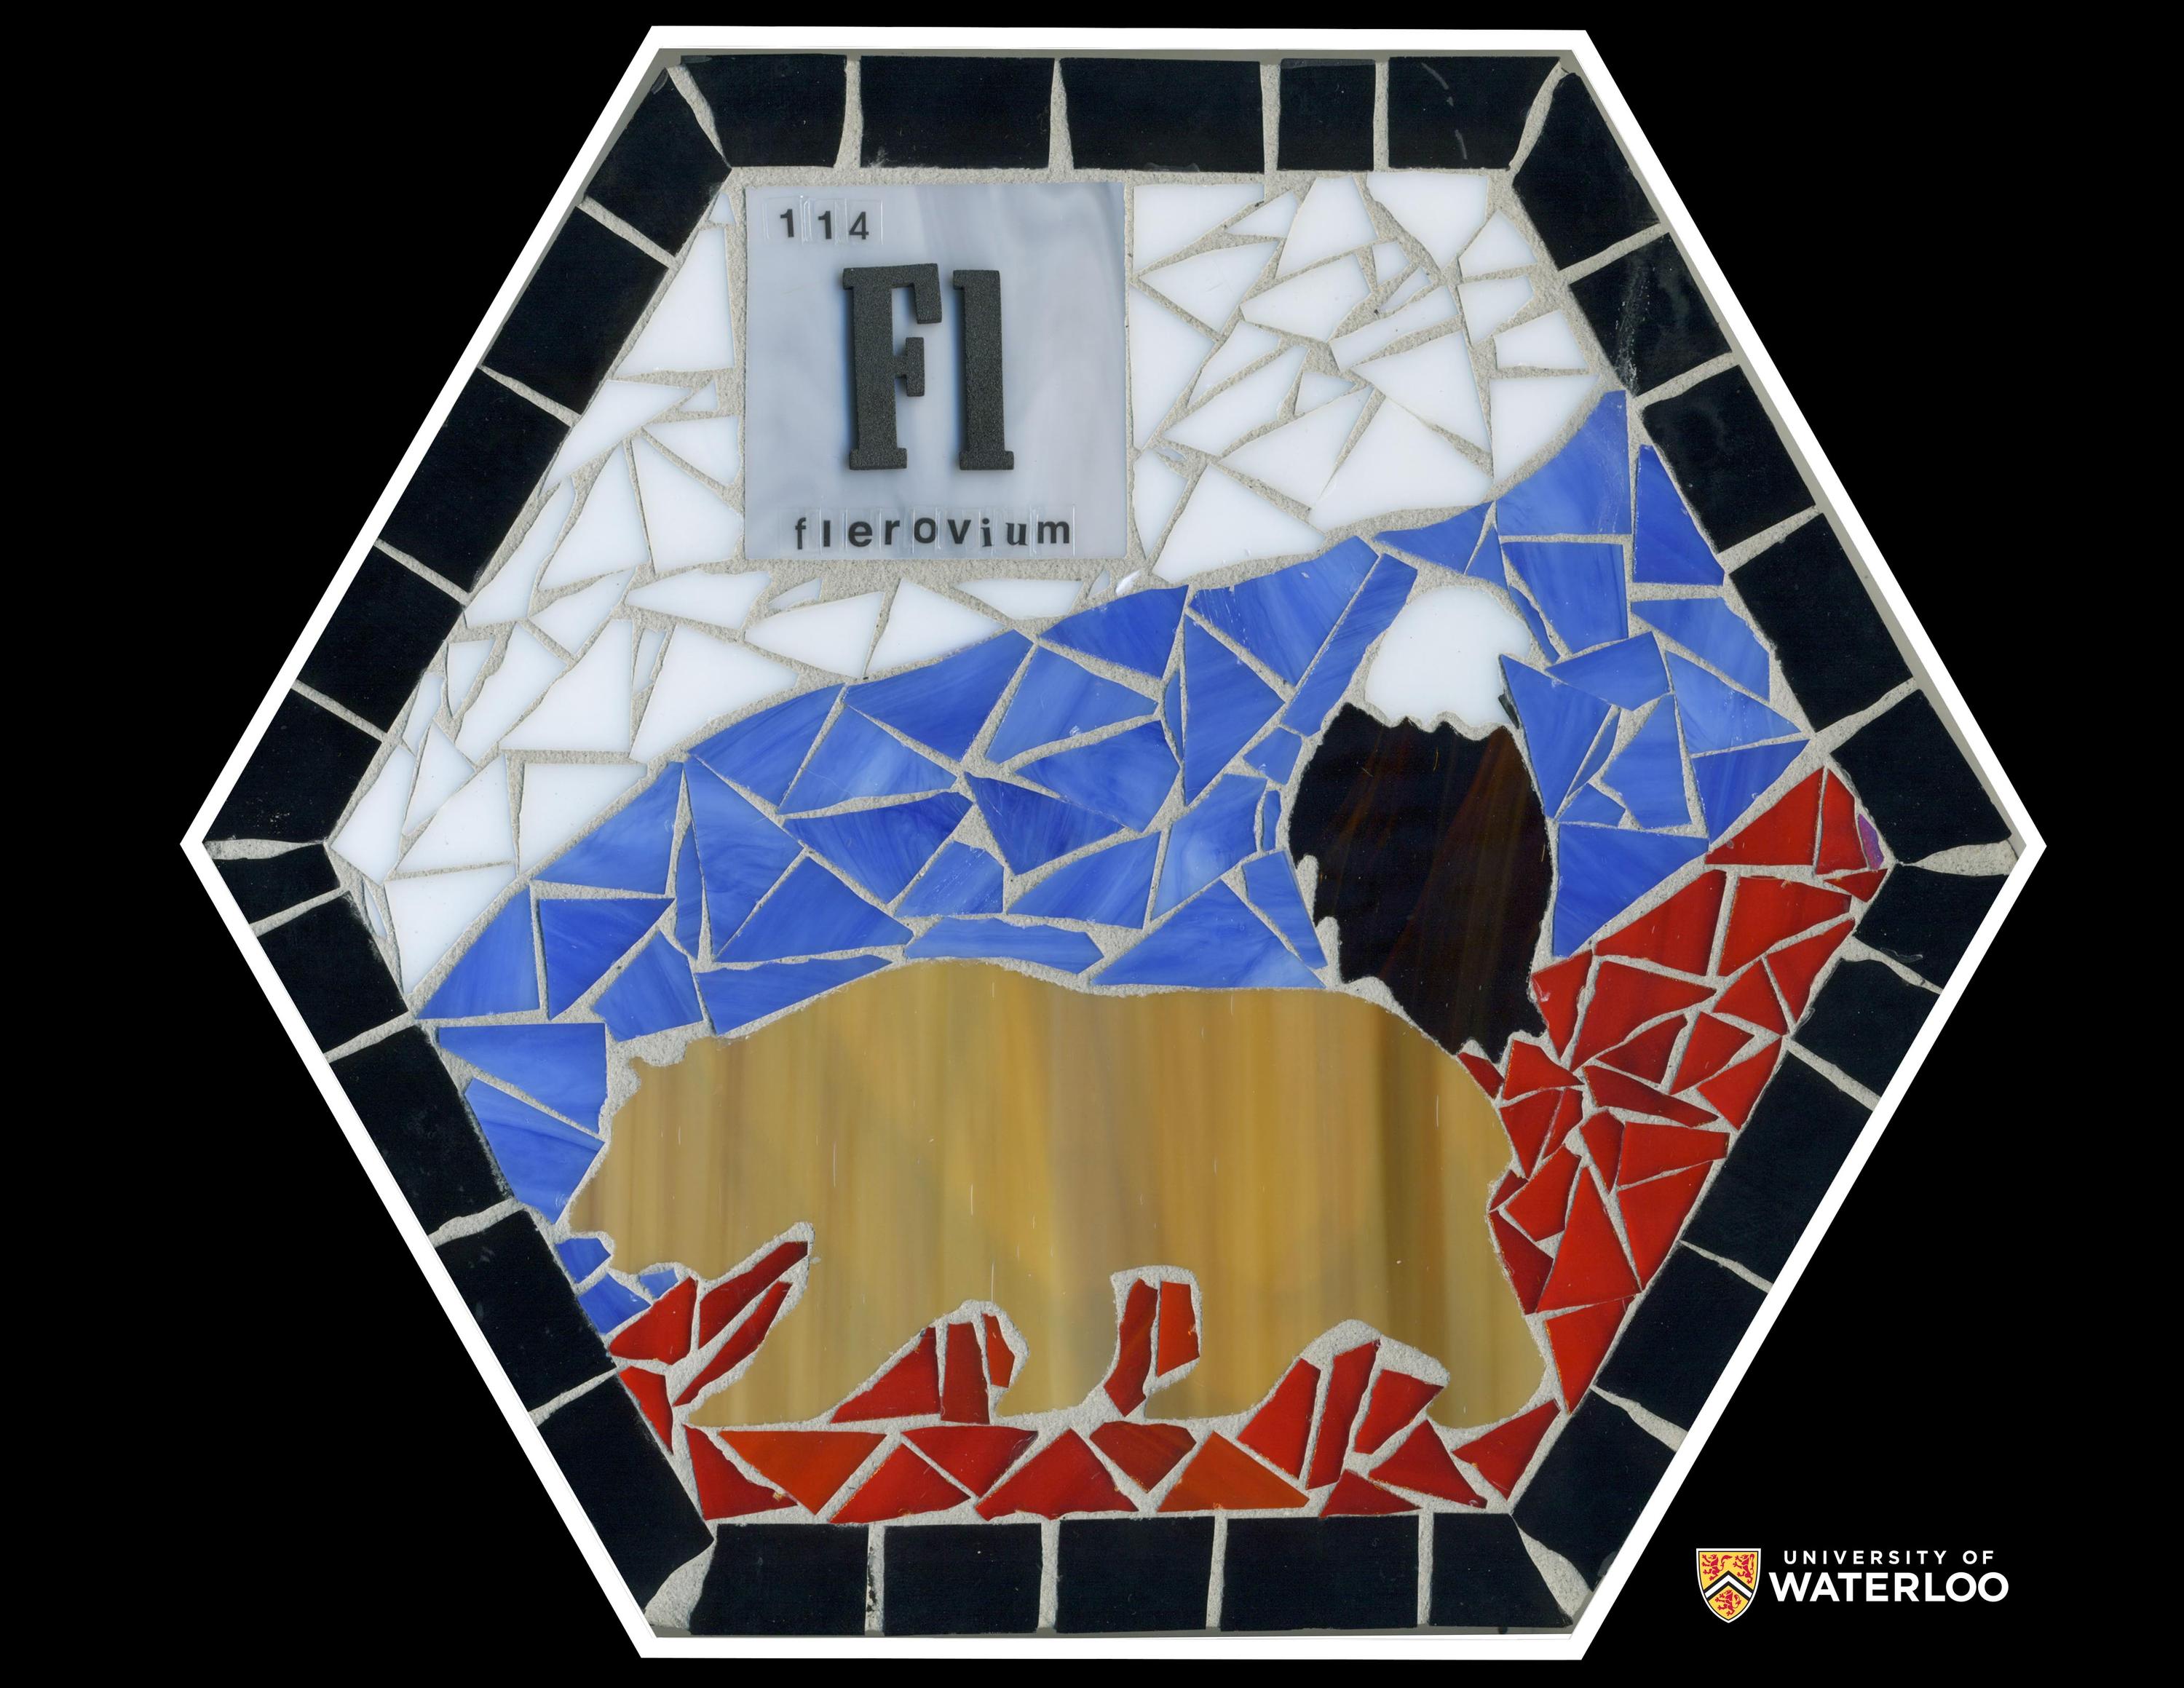 Glass tile mosaic. Periodic table tile of Flerovium top left with the chemical symbol “Fl” and atomic number “114”. Background contains white, blue and red pieces. Foreground shows a bald eagle perched on the back of a brown bear.